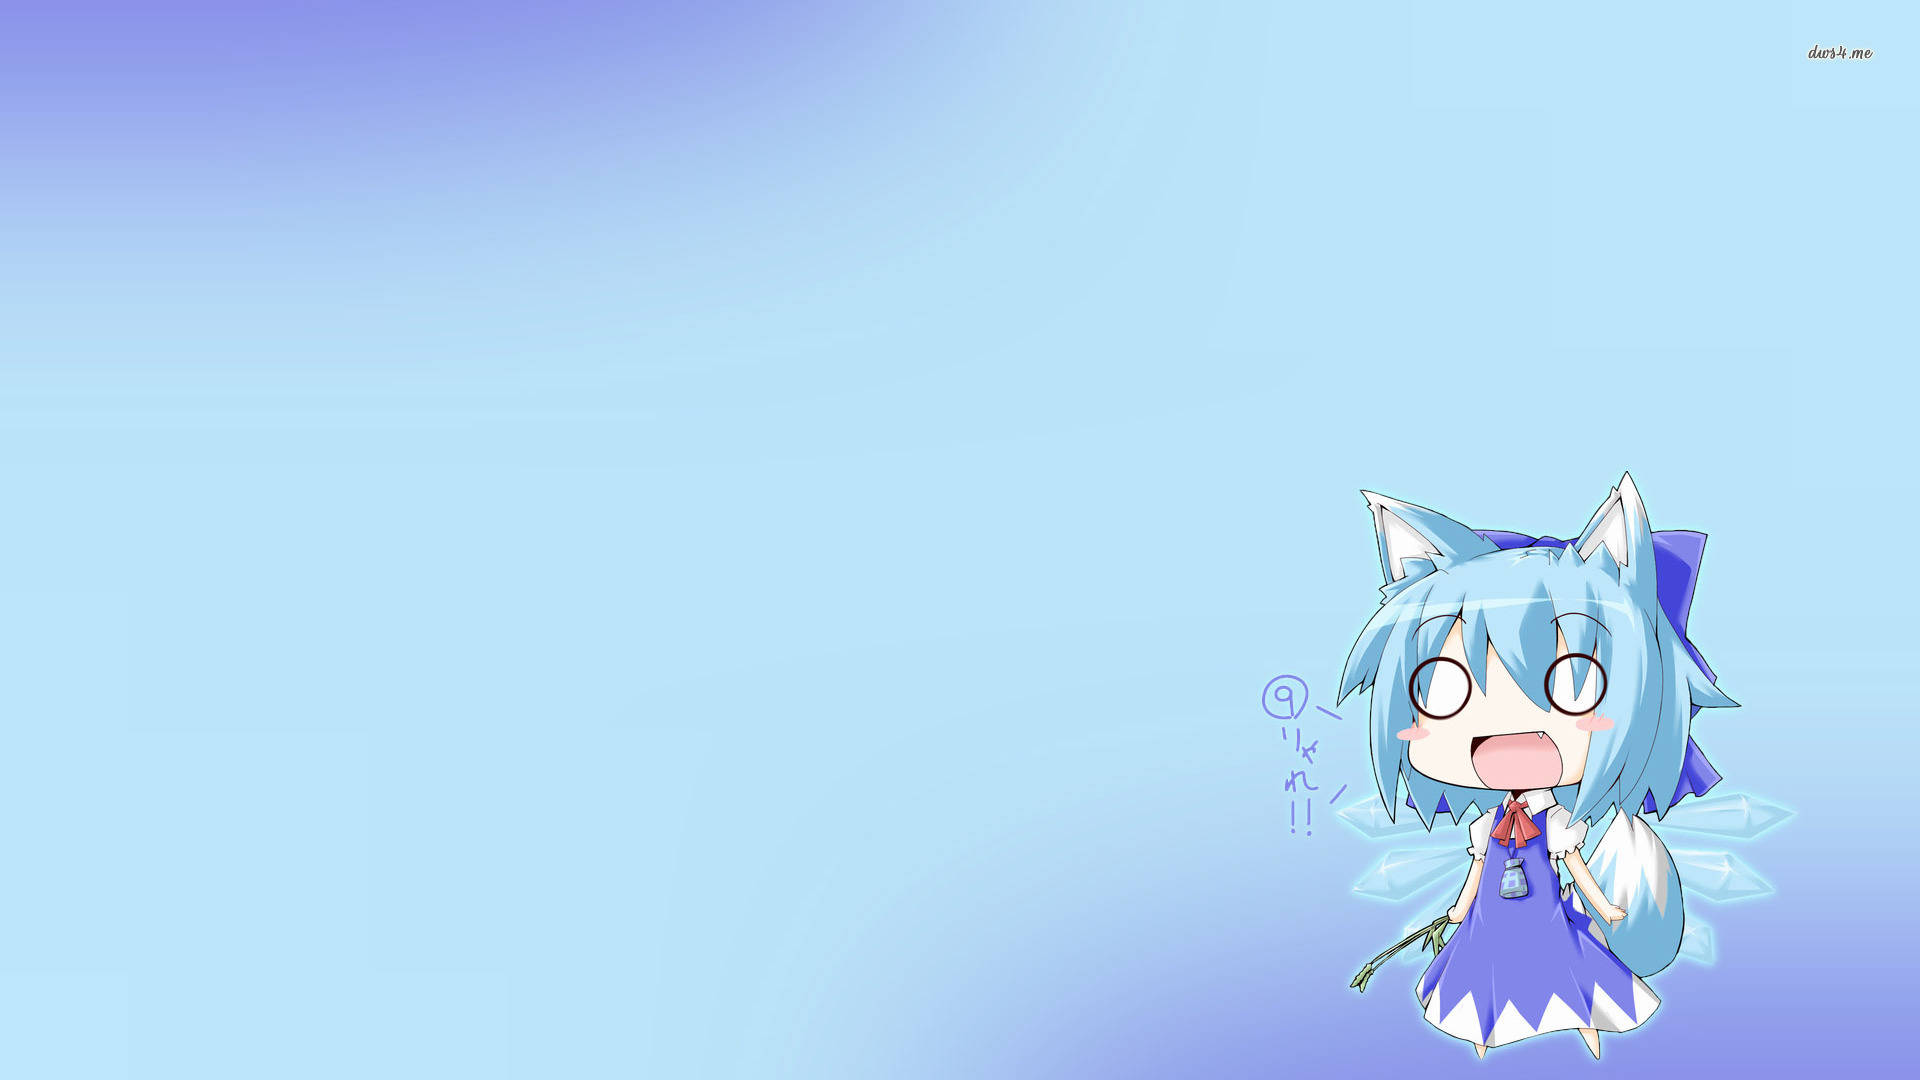 Cirno   Touhou Project wallpaper   Anime wallpapers   31350